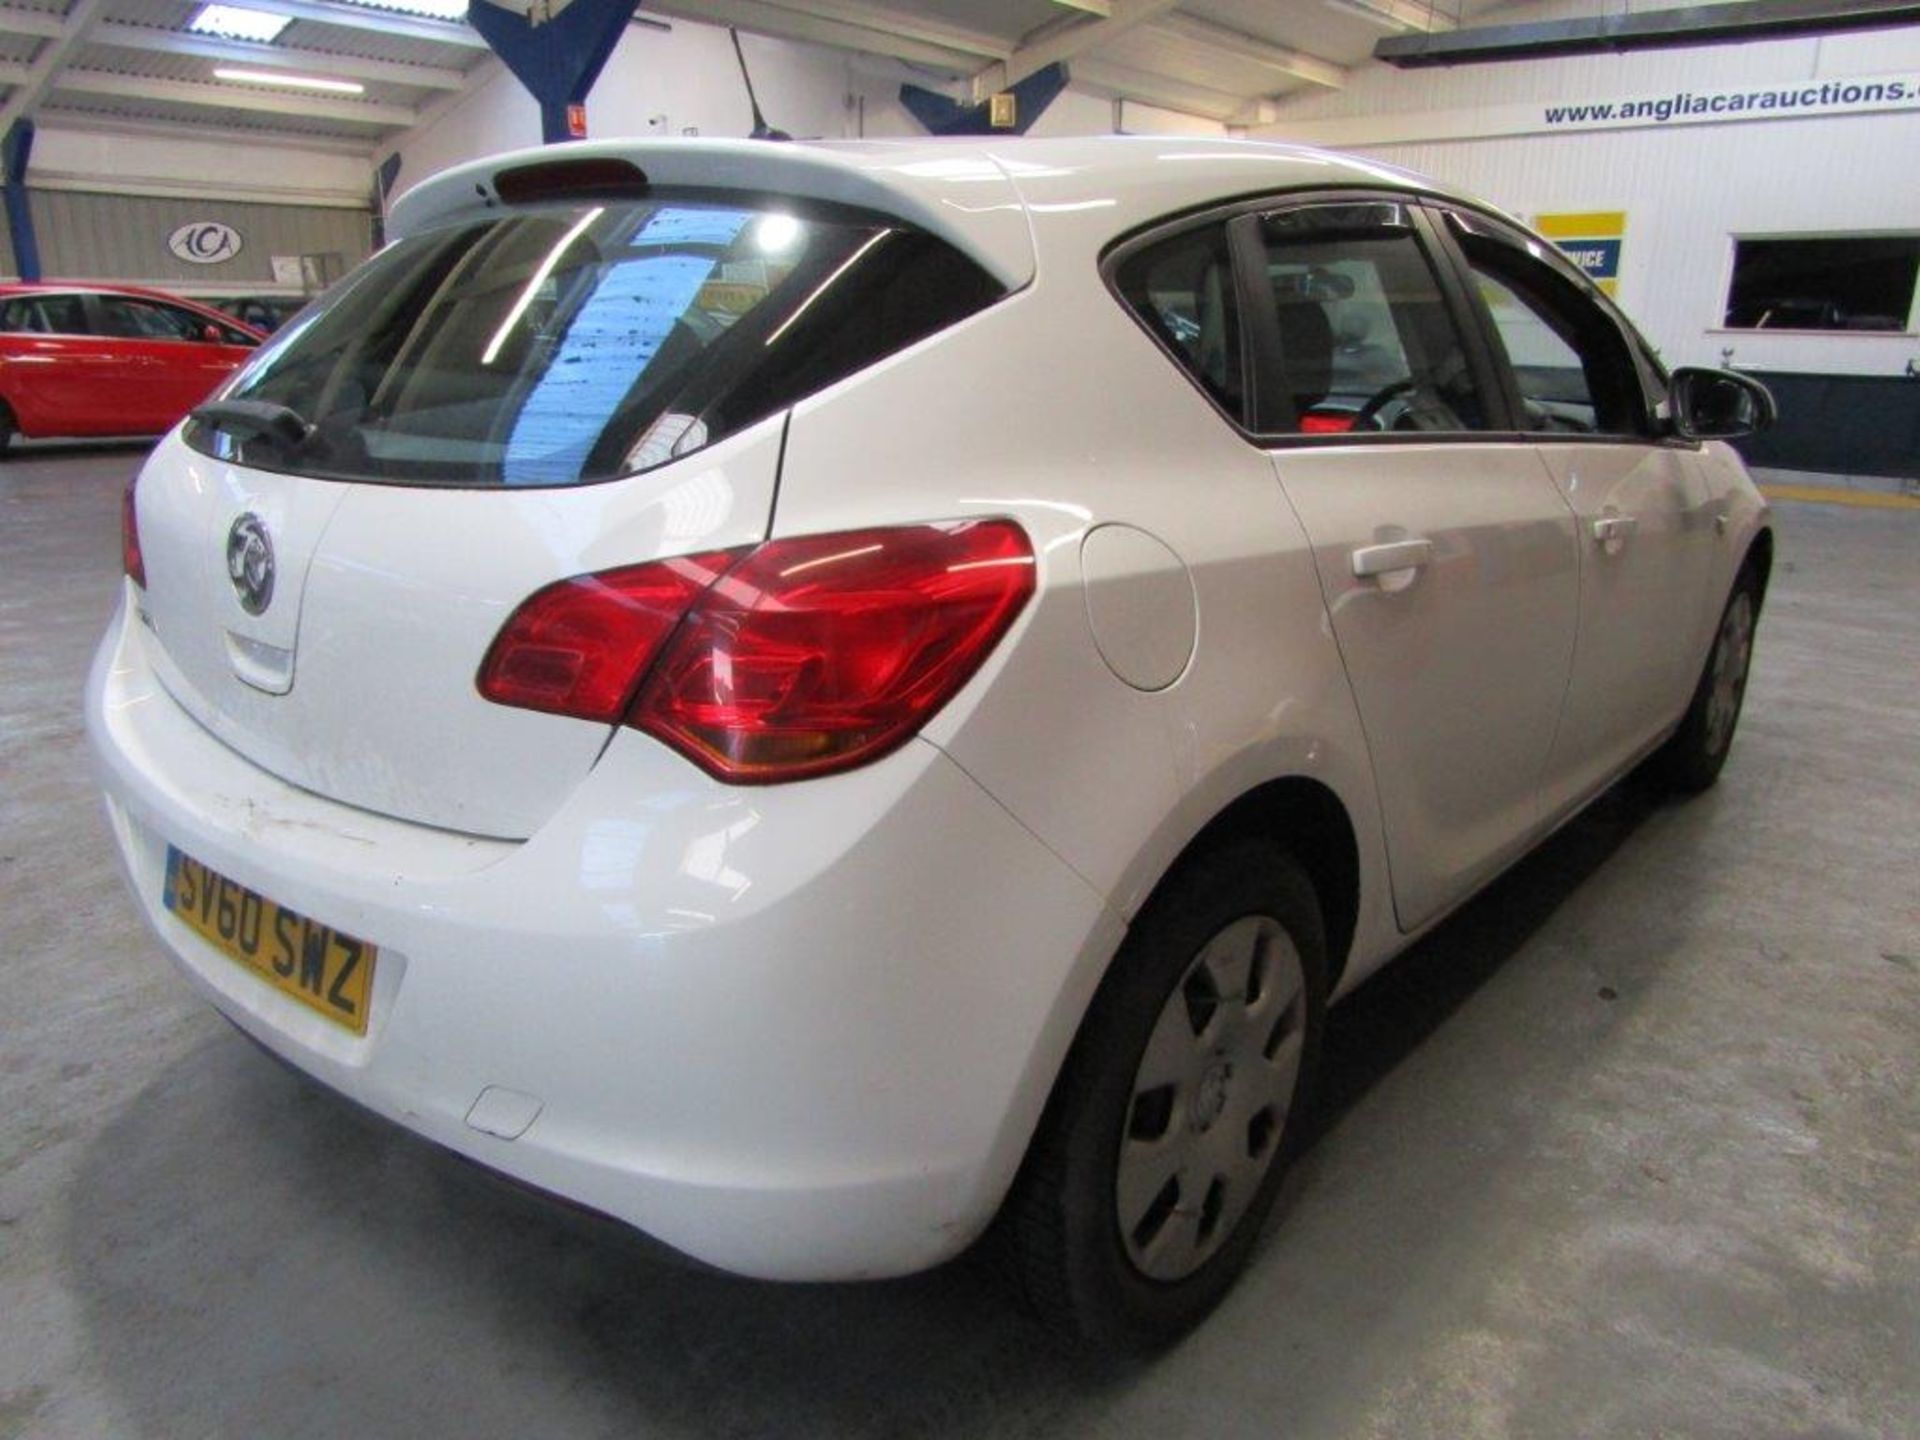 60 10 Vauxhall Astra Exclusiv 98 - Image 3 of 20